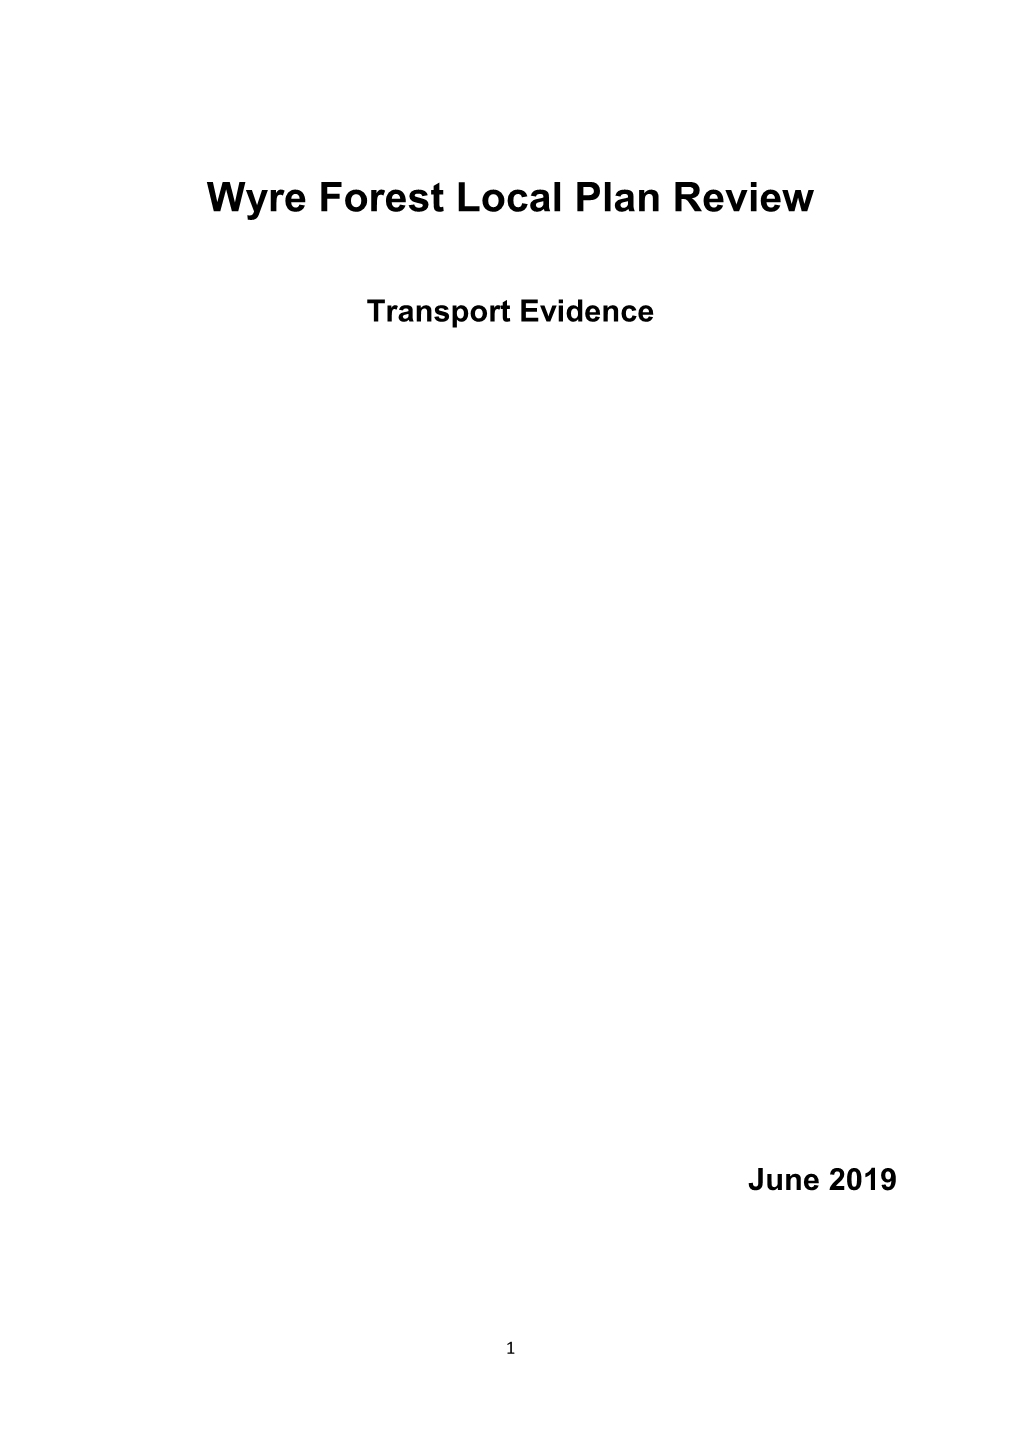 Wyre Forest Local Plan Review Transport Evidence